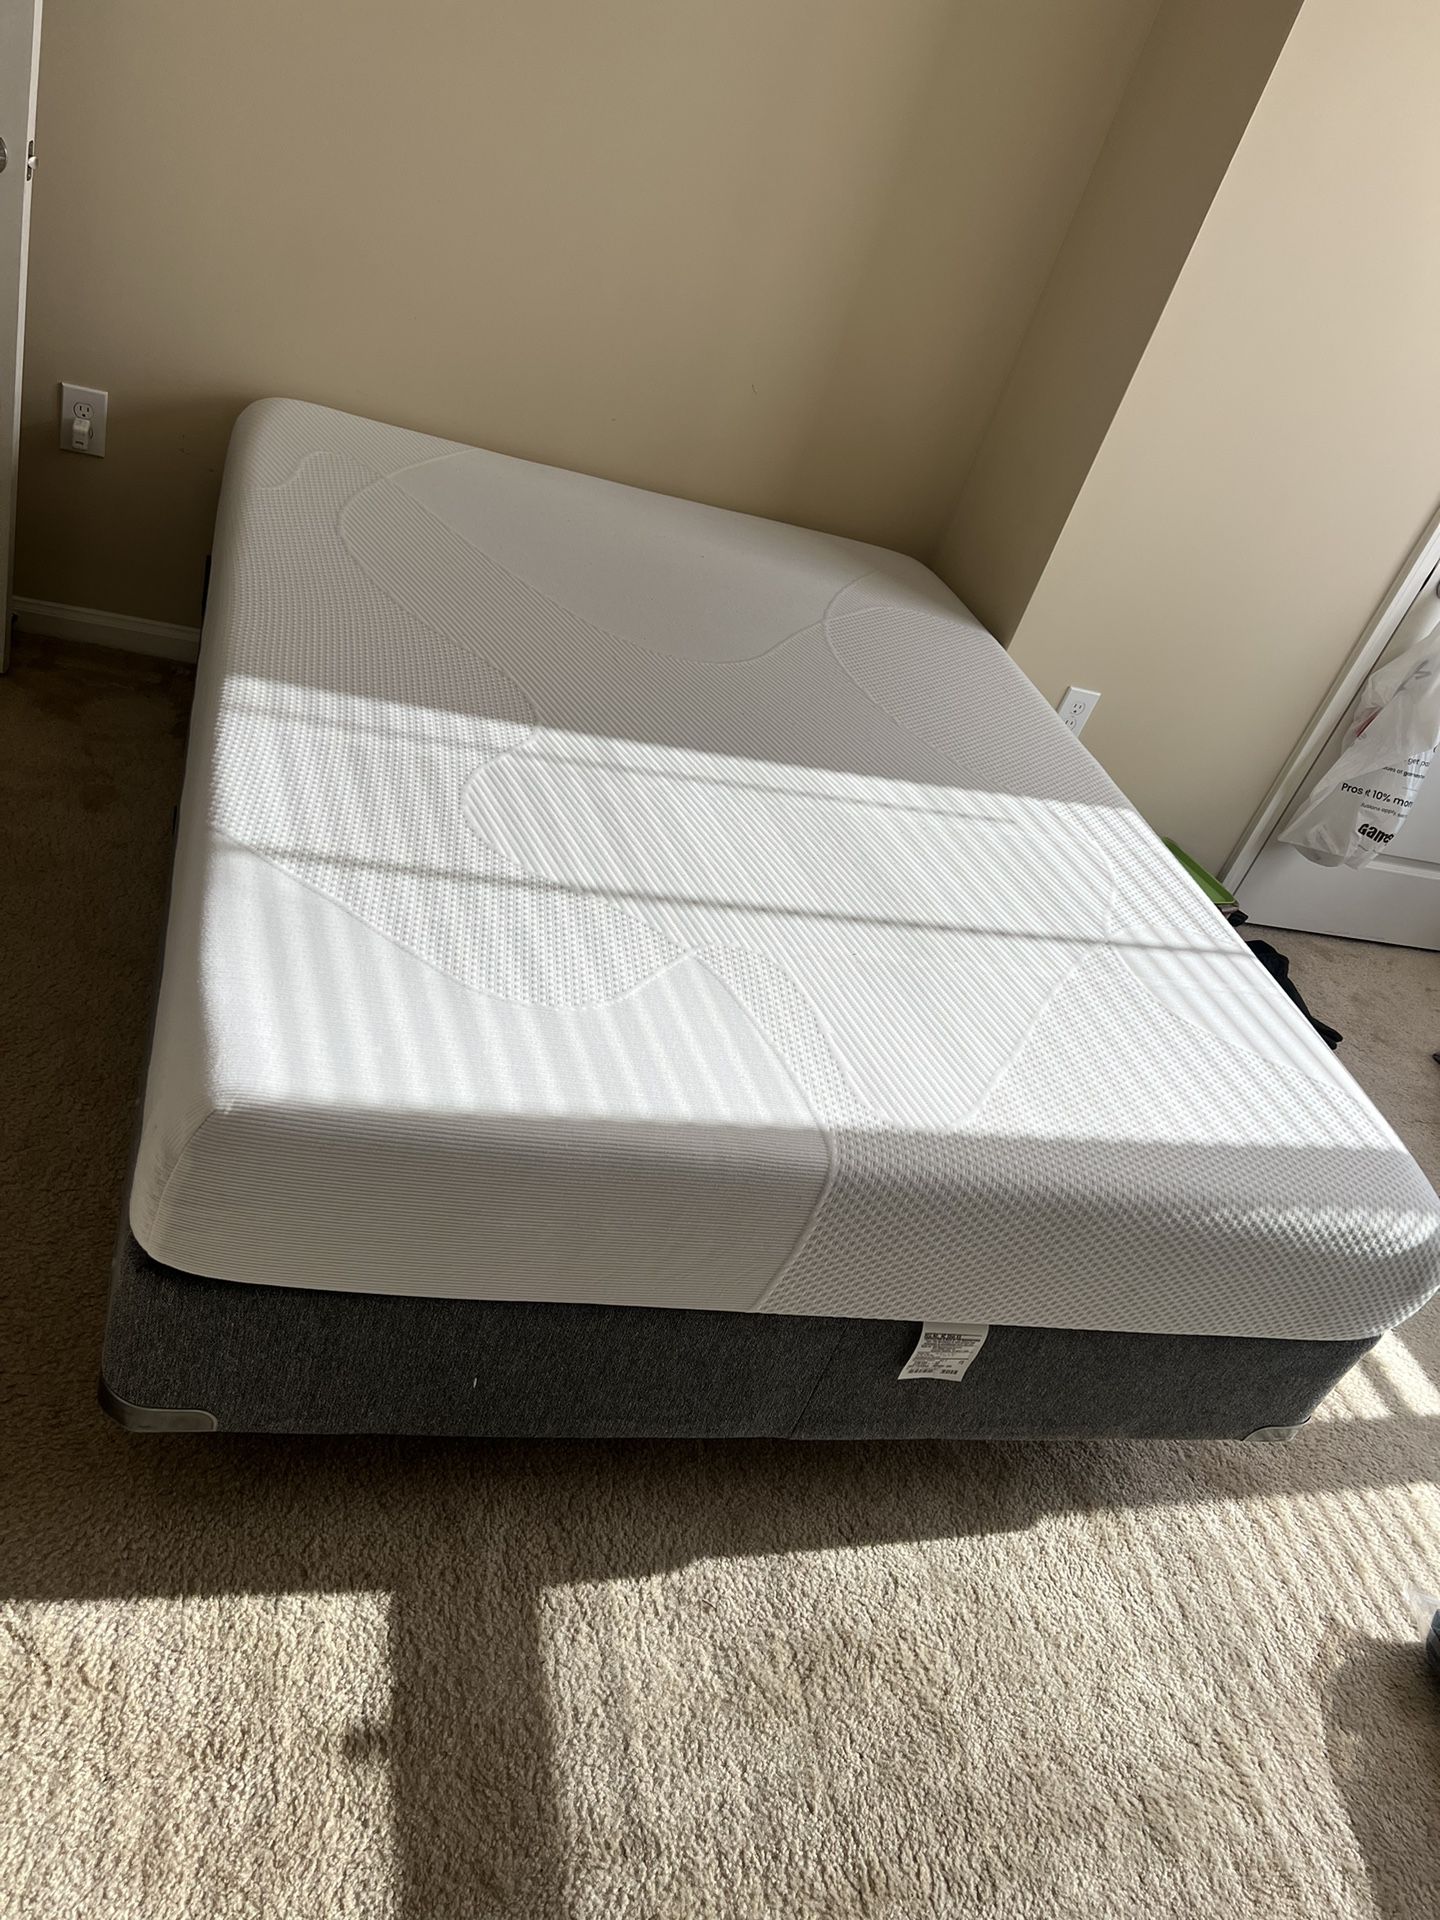 Queen Sized Mattress With Box Spring And Stand